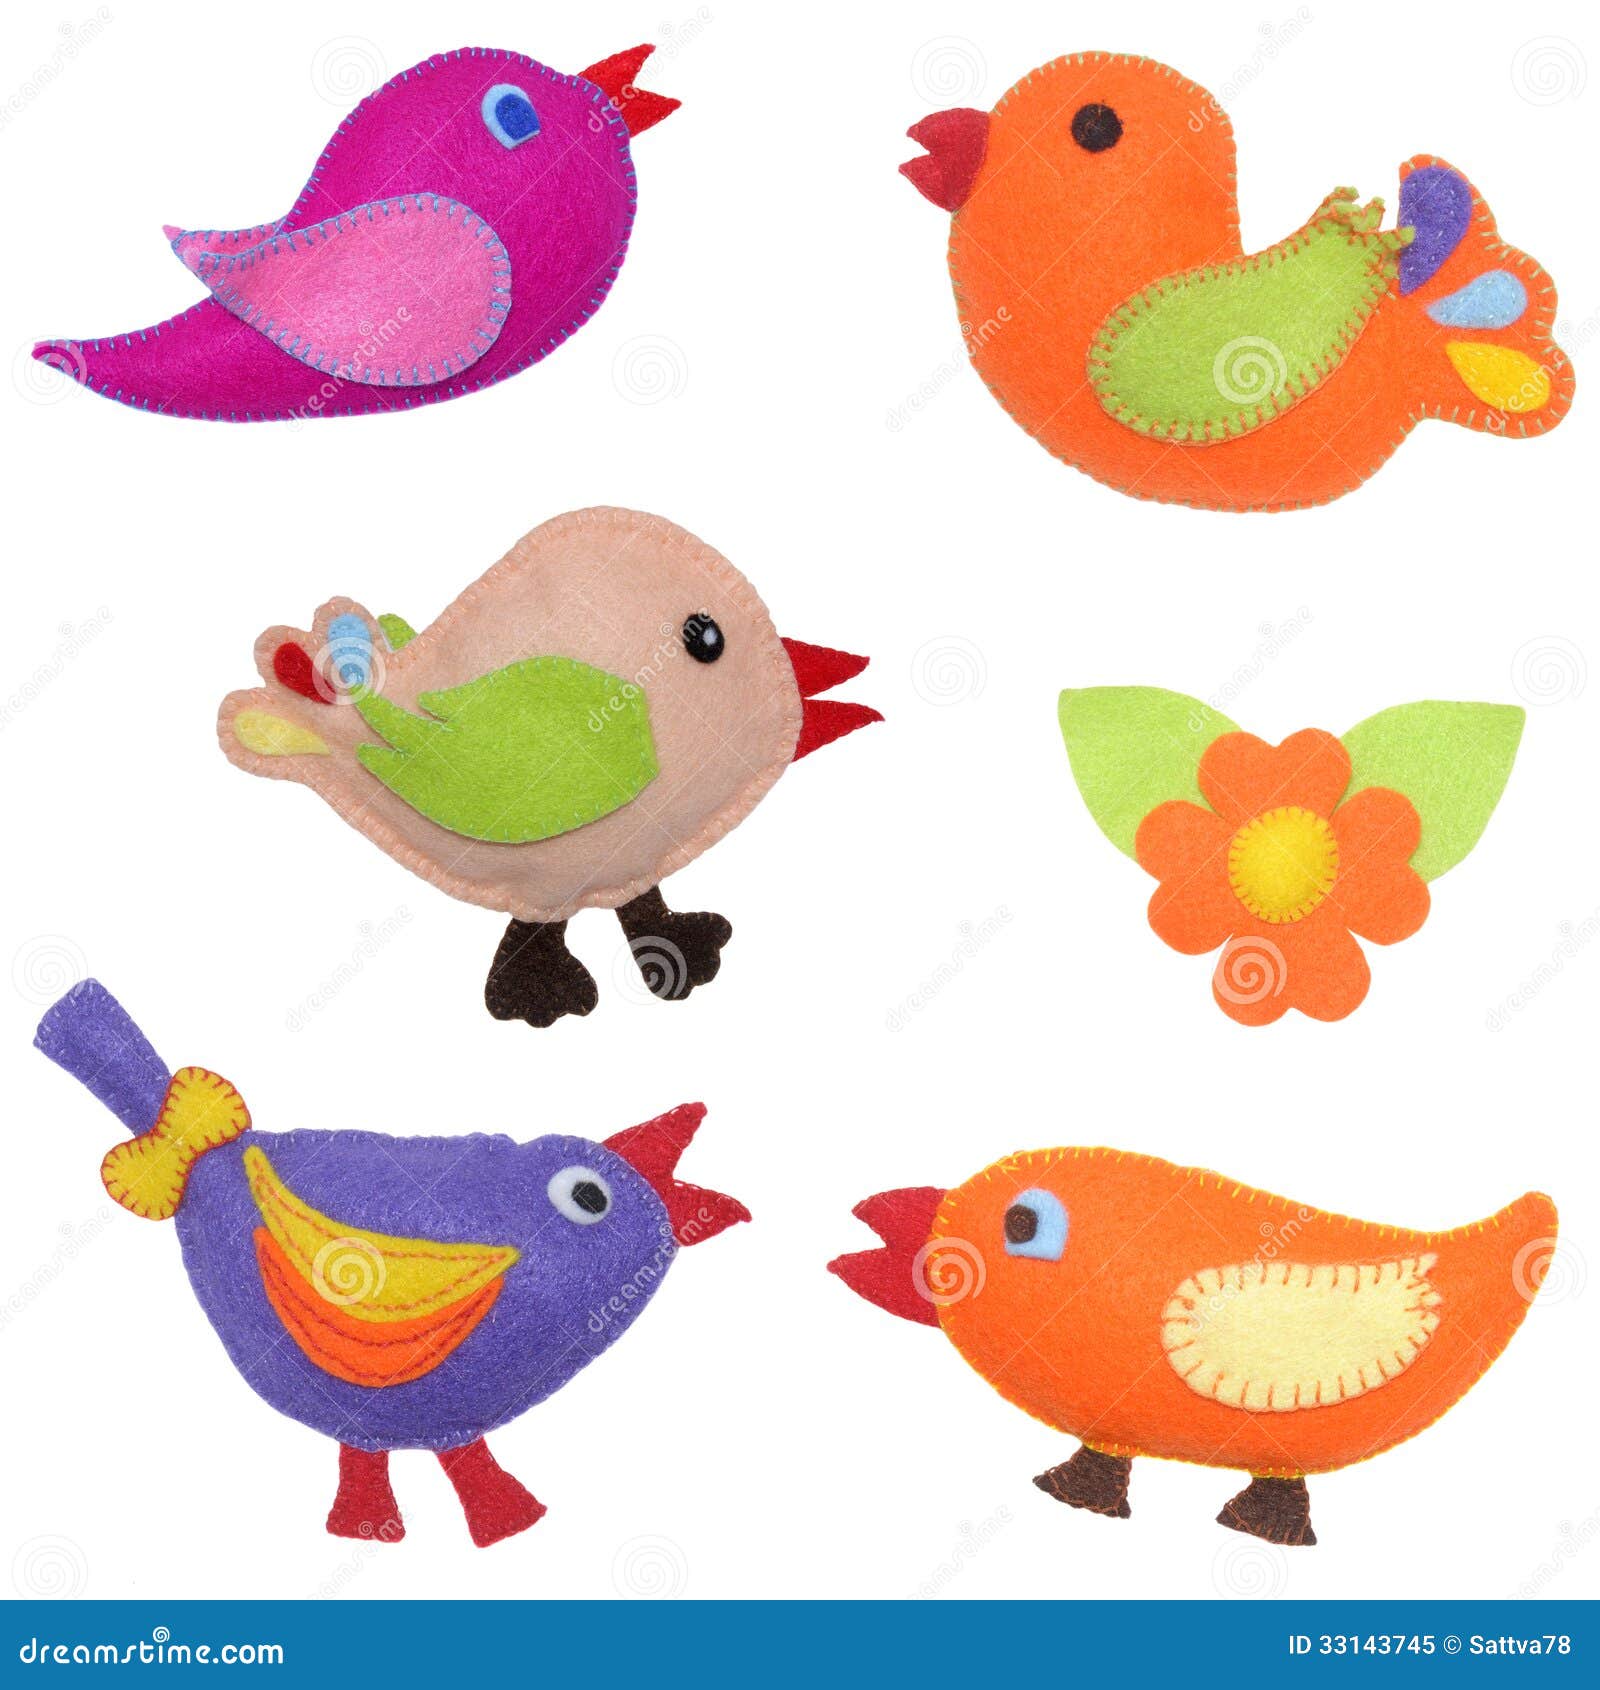 Birds and flower - 5 kids toys